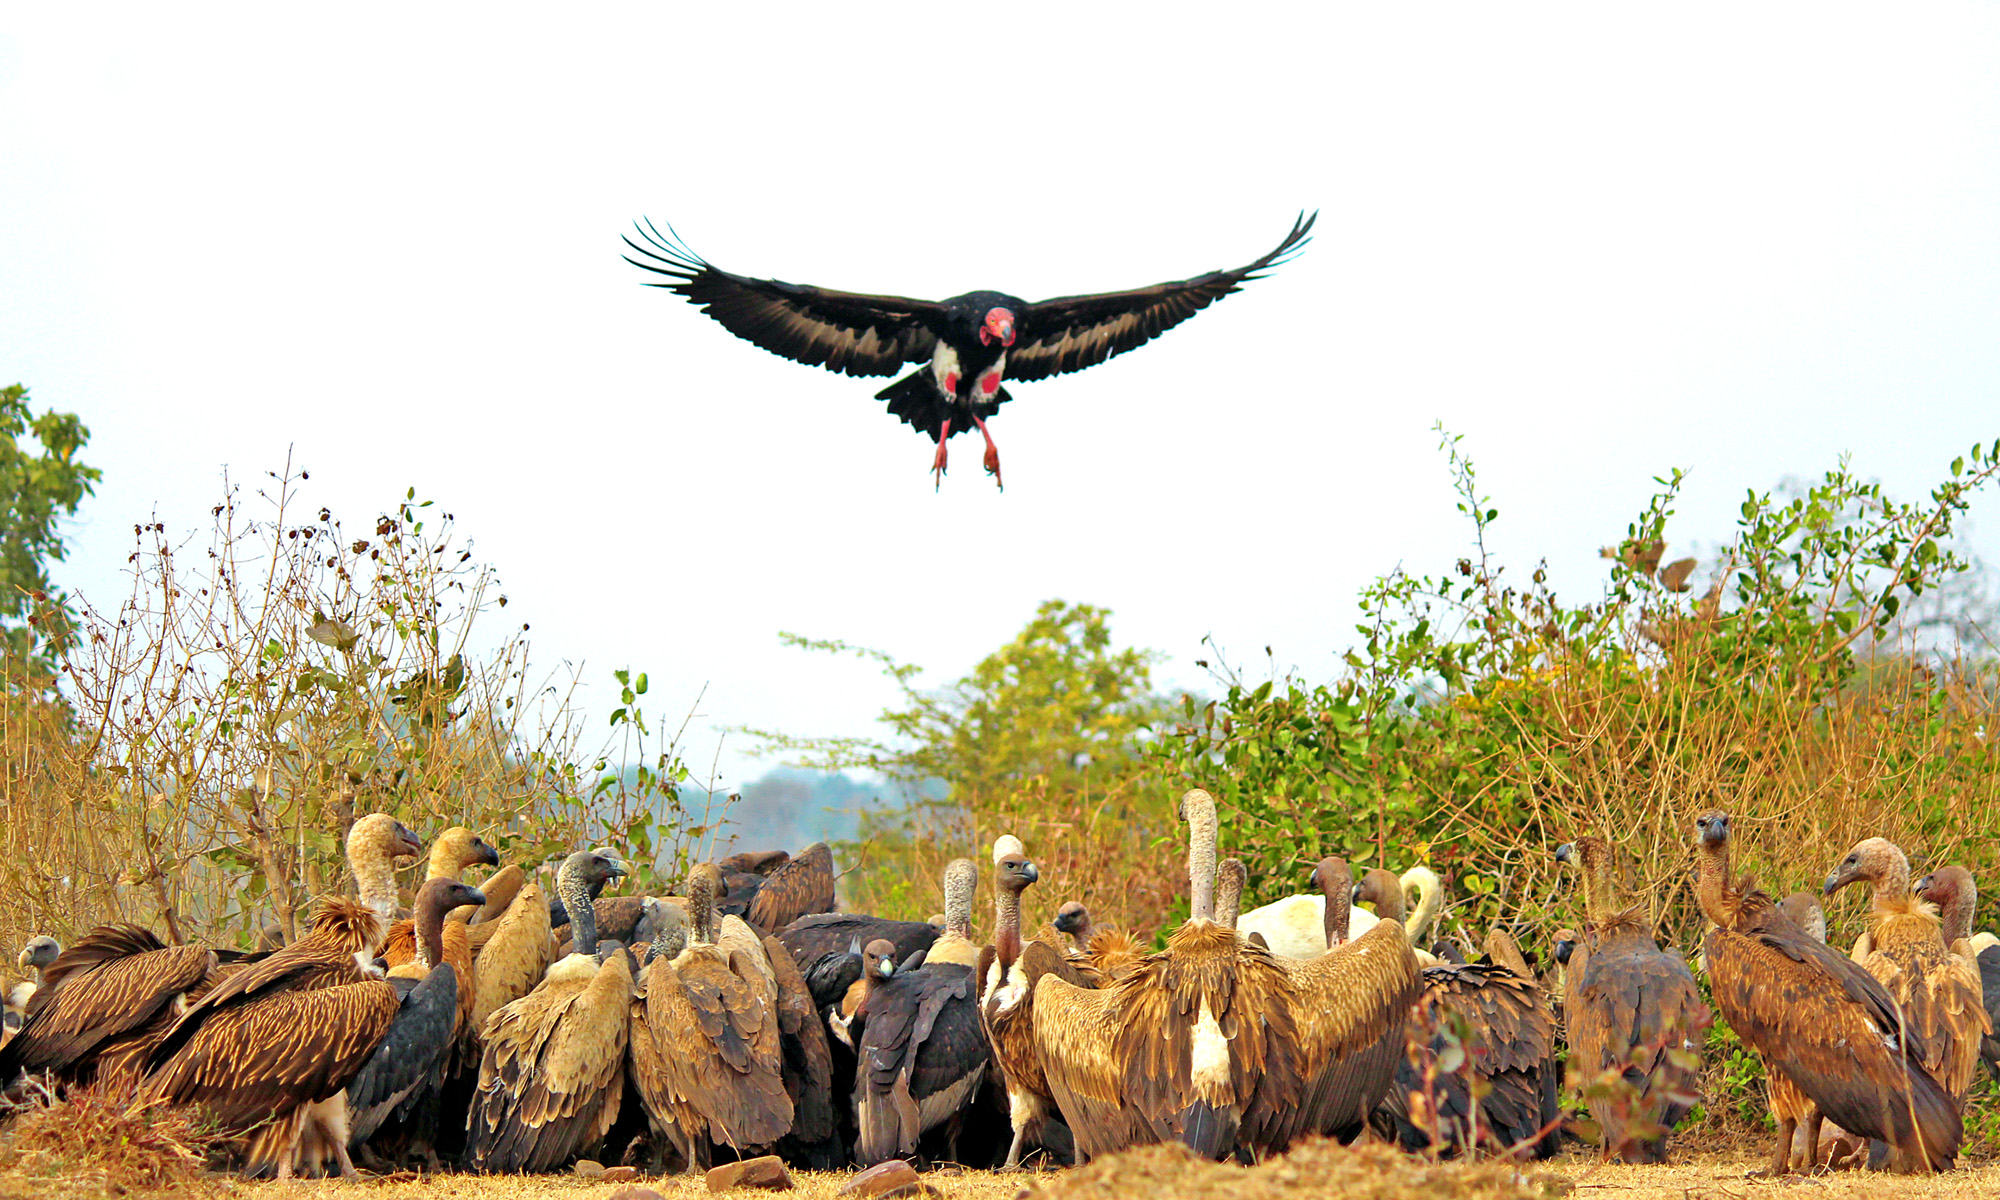 File:A flock of Vultures on carcass.jpg - Wikimedia Commons